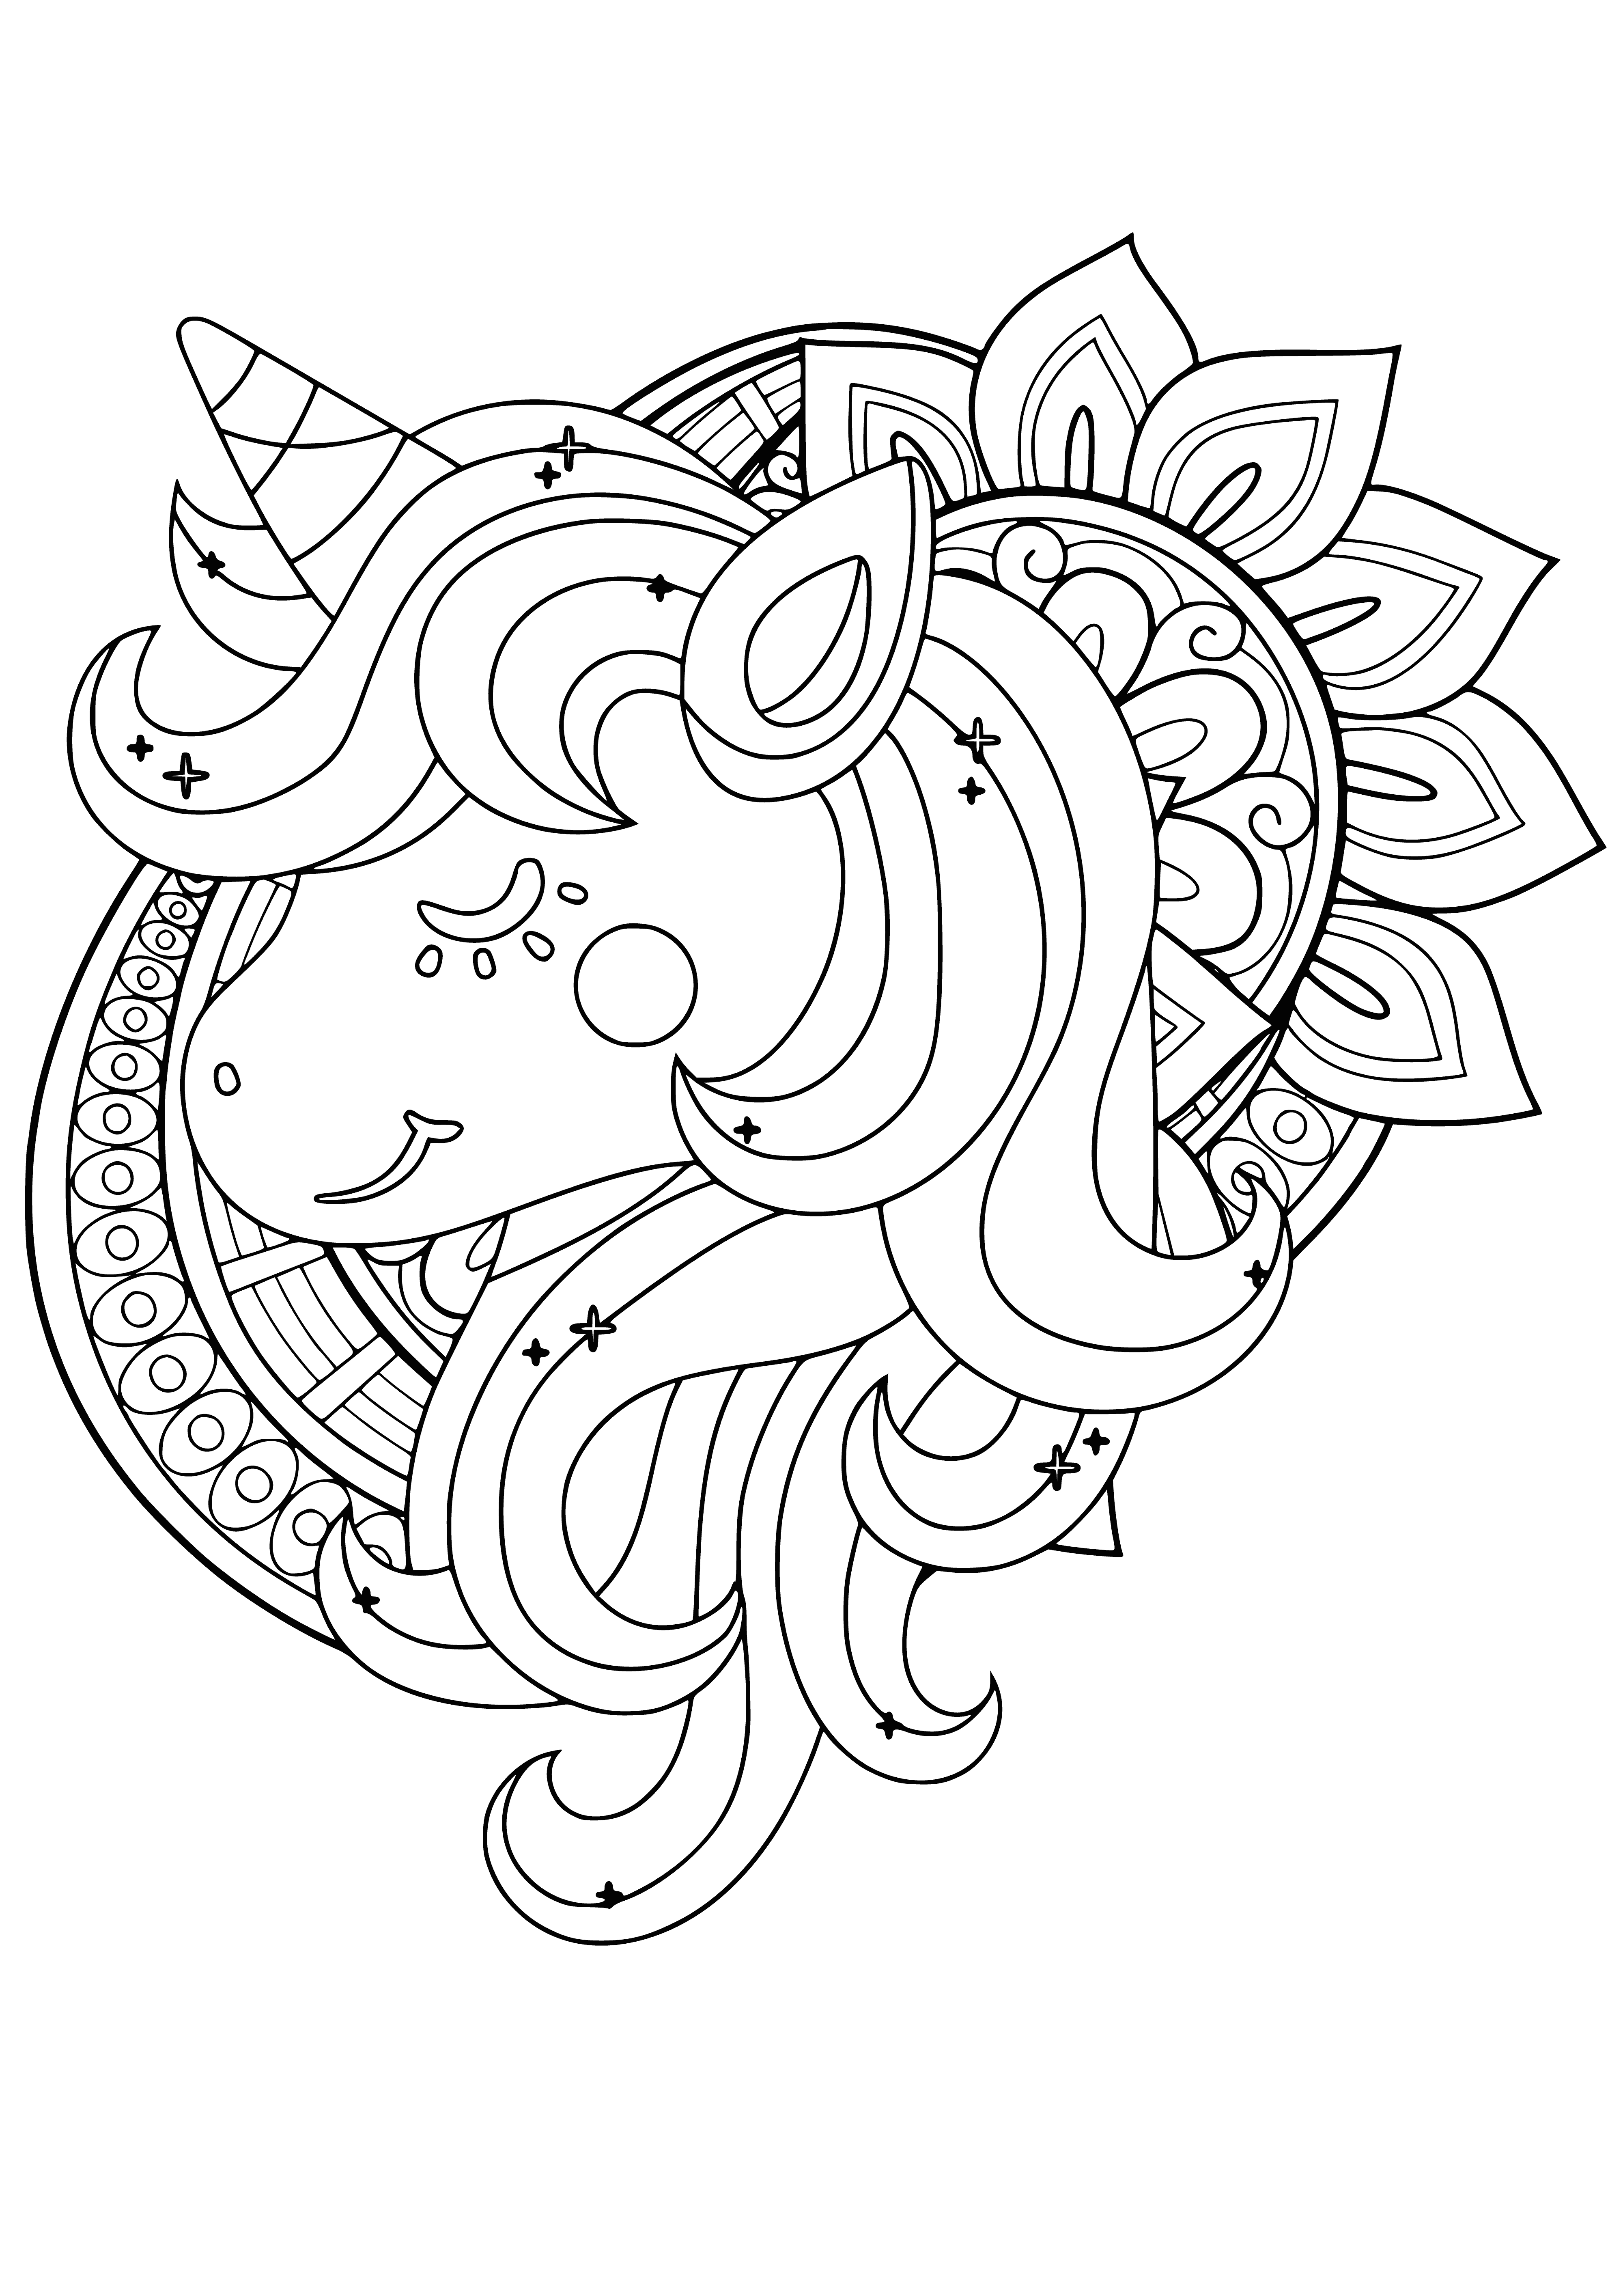 coloring page: Coloring page of majestic unicorn with gold horn, flowing mane & tail, plus stars & hearts. Perfect for adults!